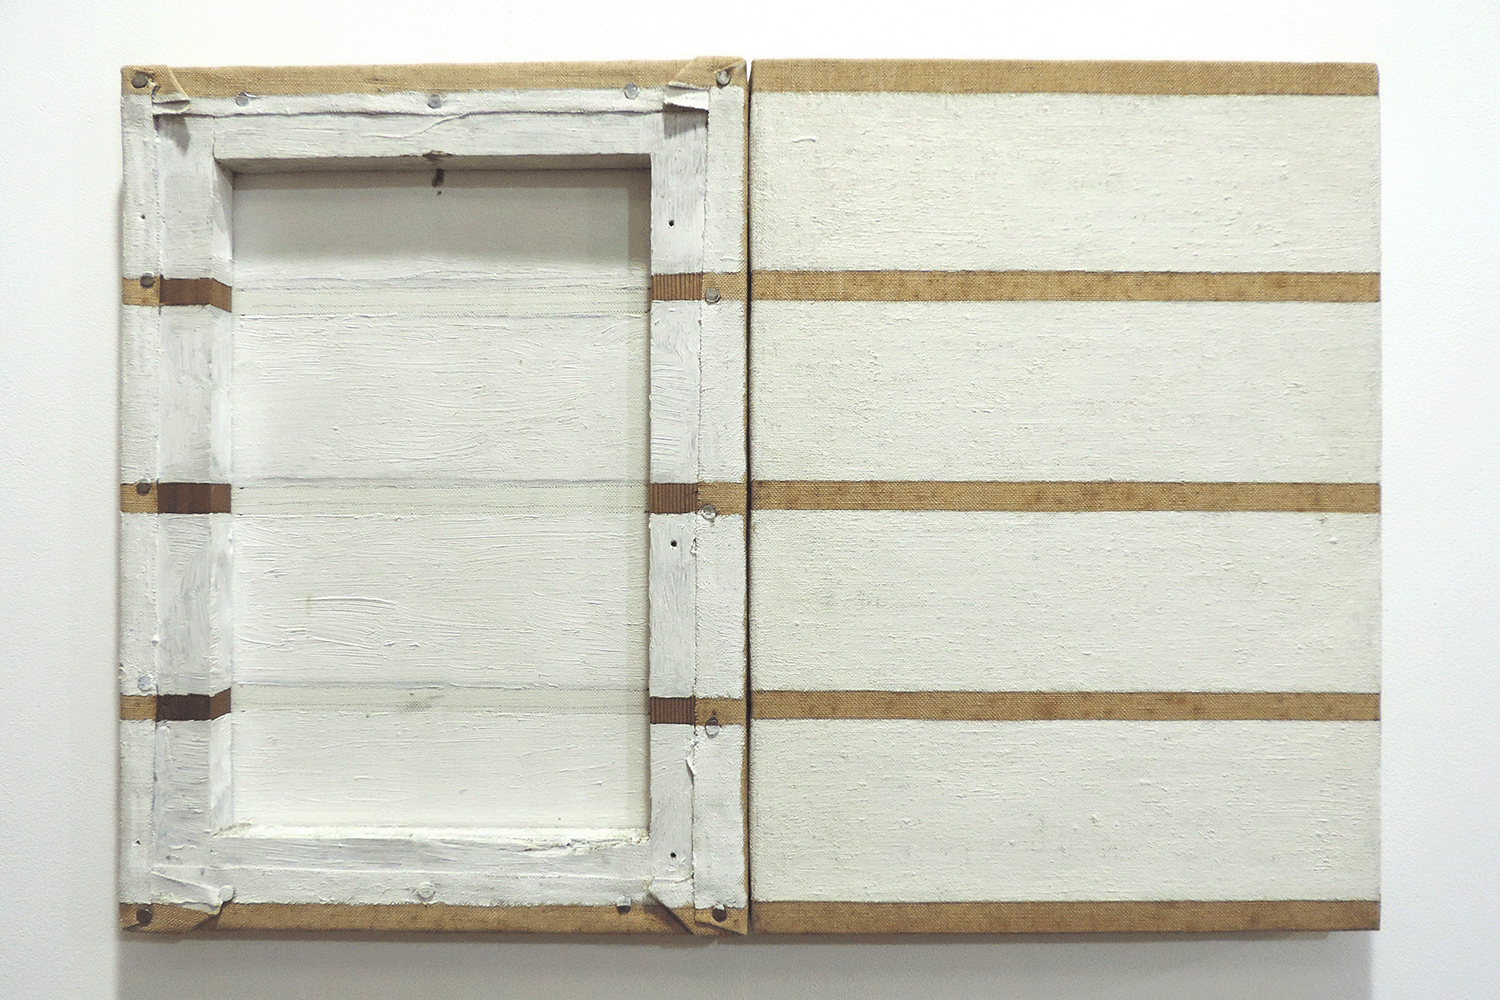 Untitled　/ Oil, pencil on Canvas,33.5 x 48 cm,1969 (2 panels)